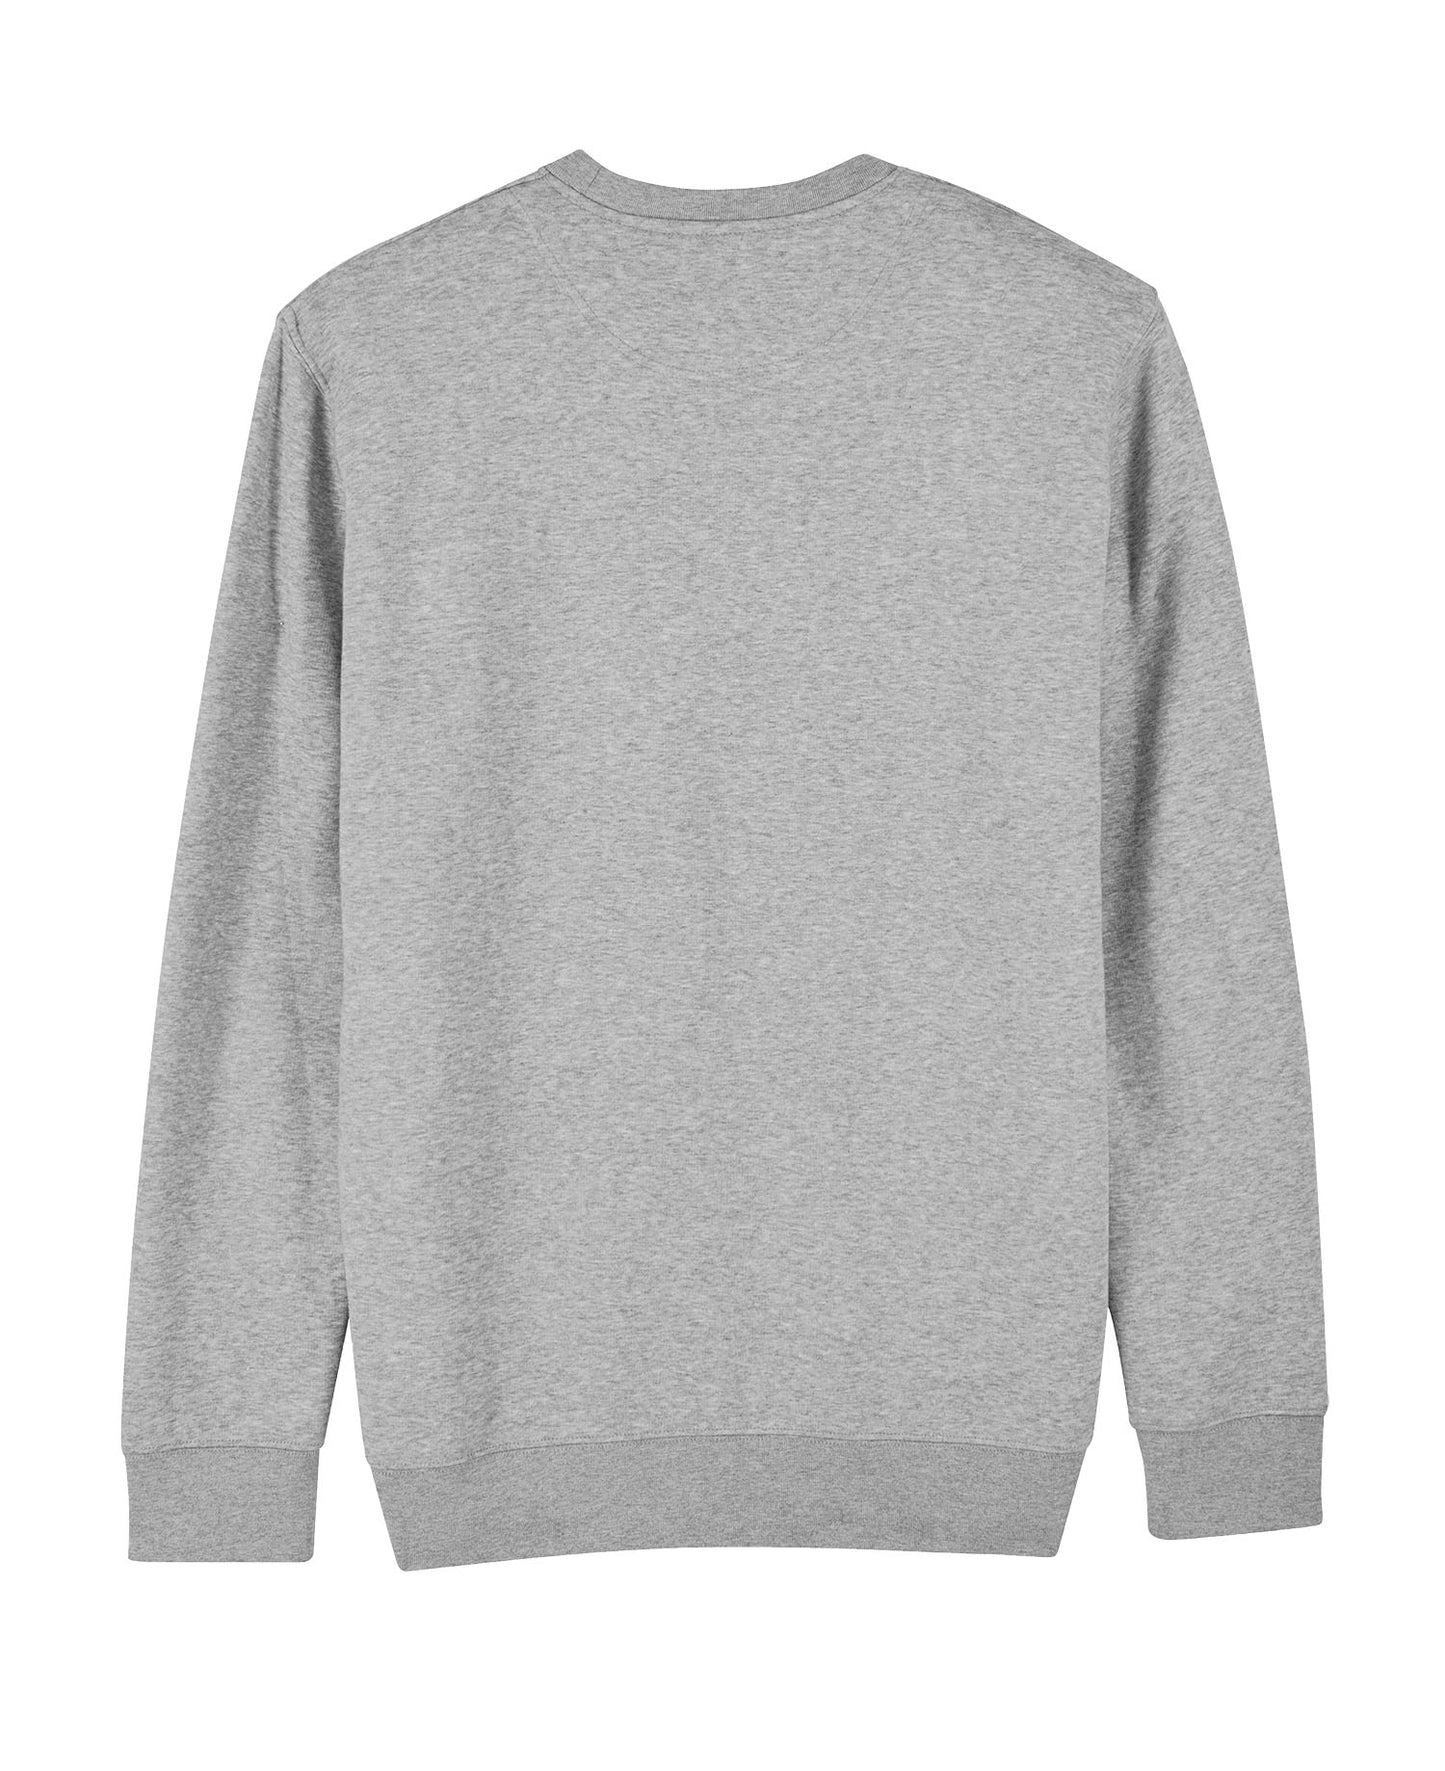 
                  
                    The Flying Fish | Sweater Unisex | Blend Grey
                  
                